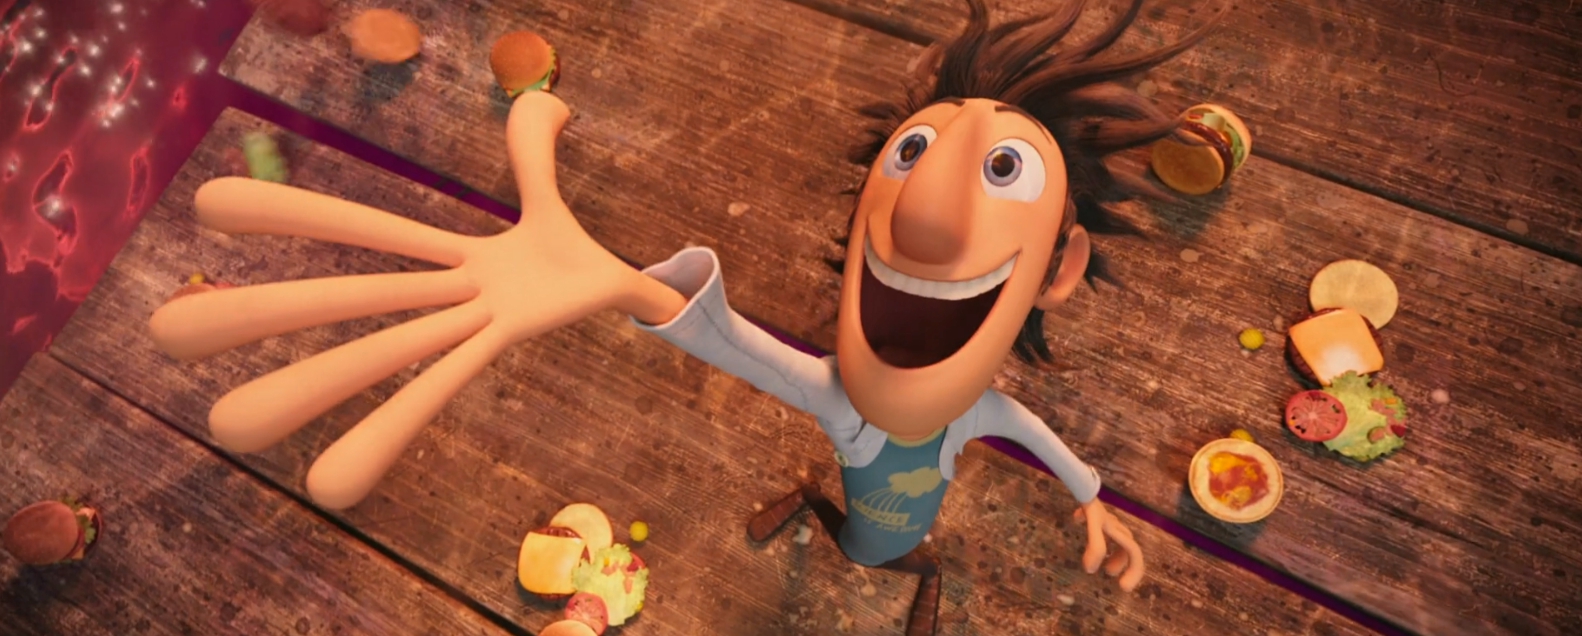 Cloudy with a Chance of Meatballs (2009) – Movie Reviews Simbasible